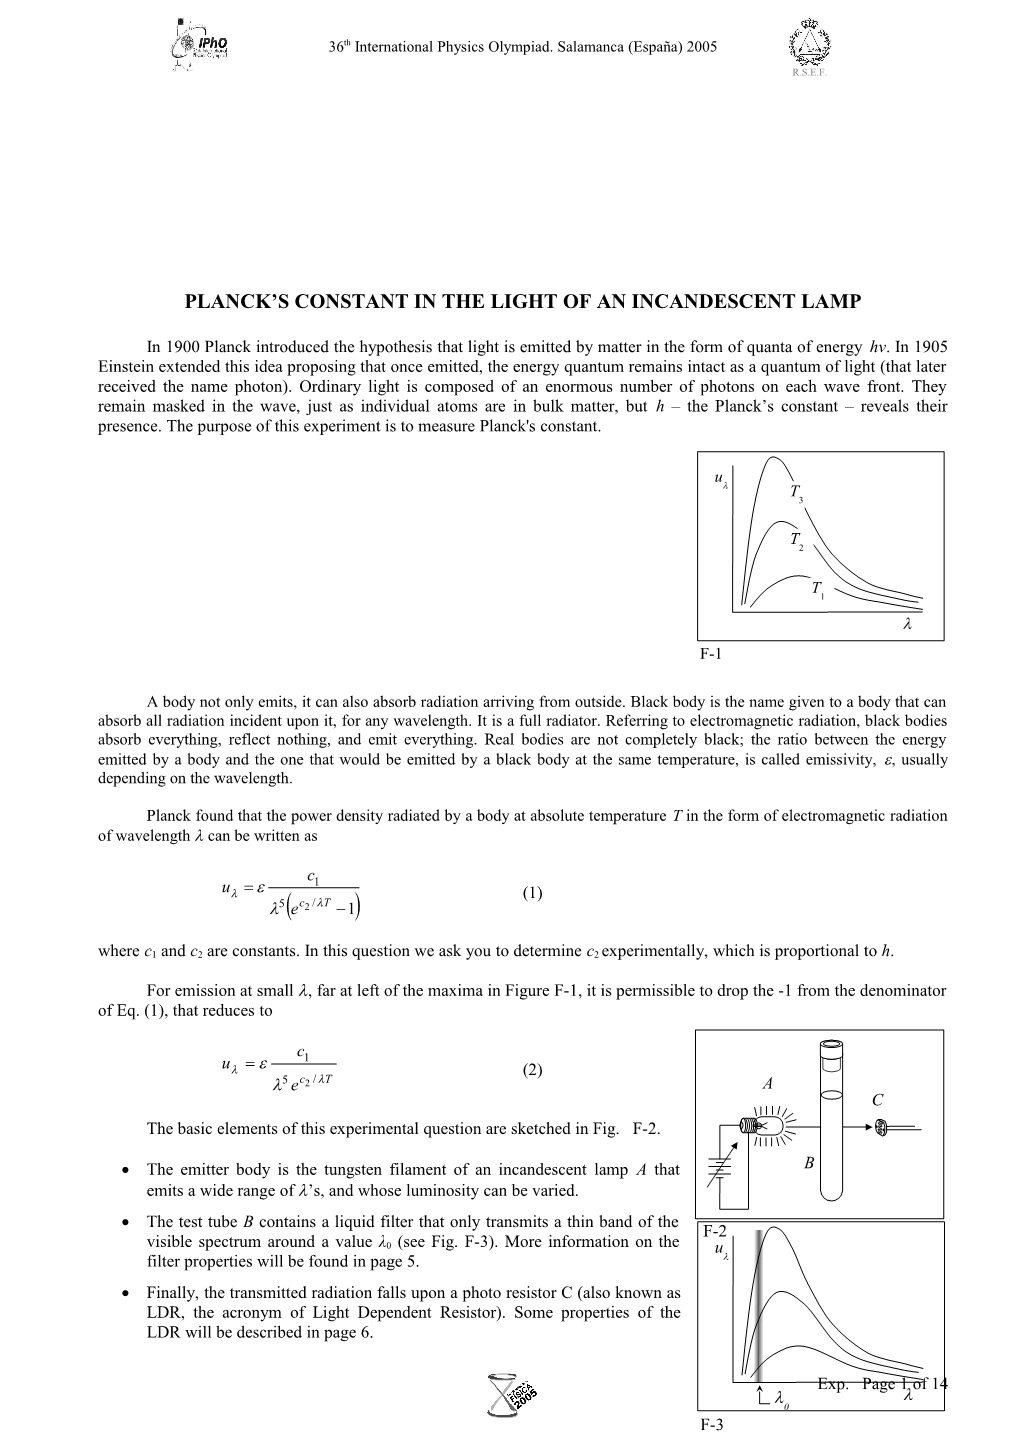 Planck S Constant in the Light of an Incandescent Lamp